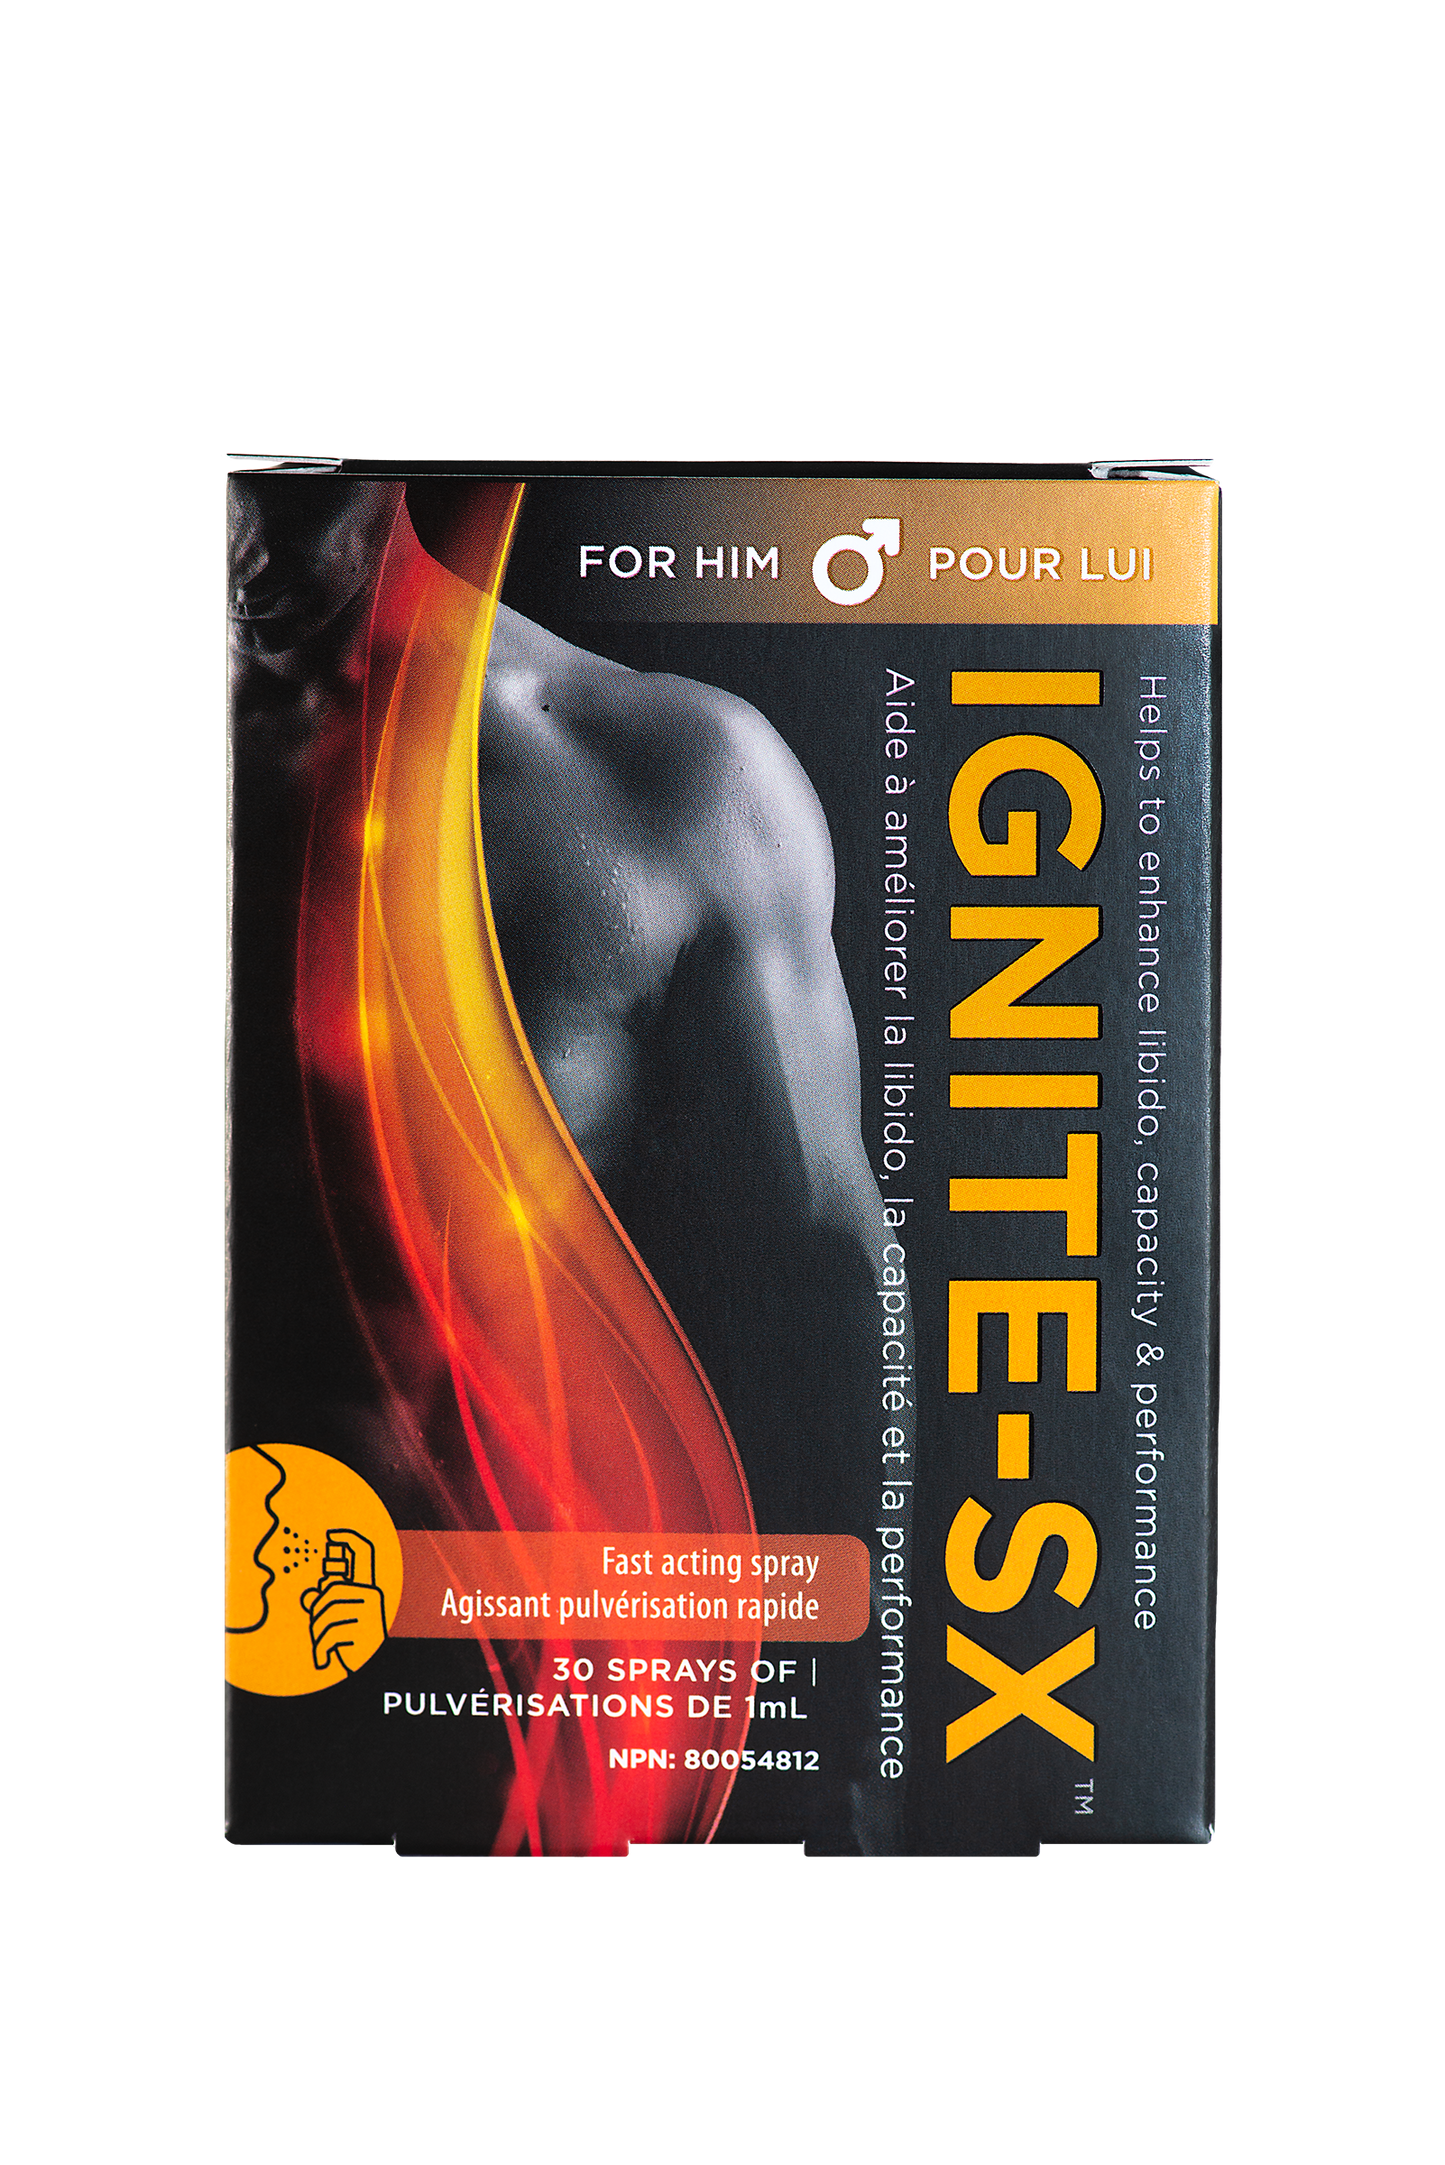 IGNITE-SX FOR HIM & FOR HER - Capsules + FOR HIM SPRAY